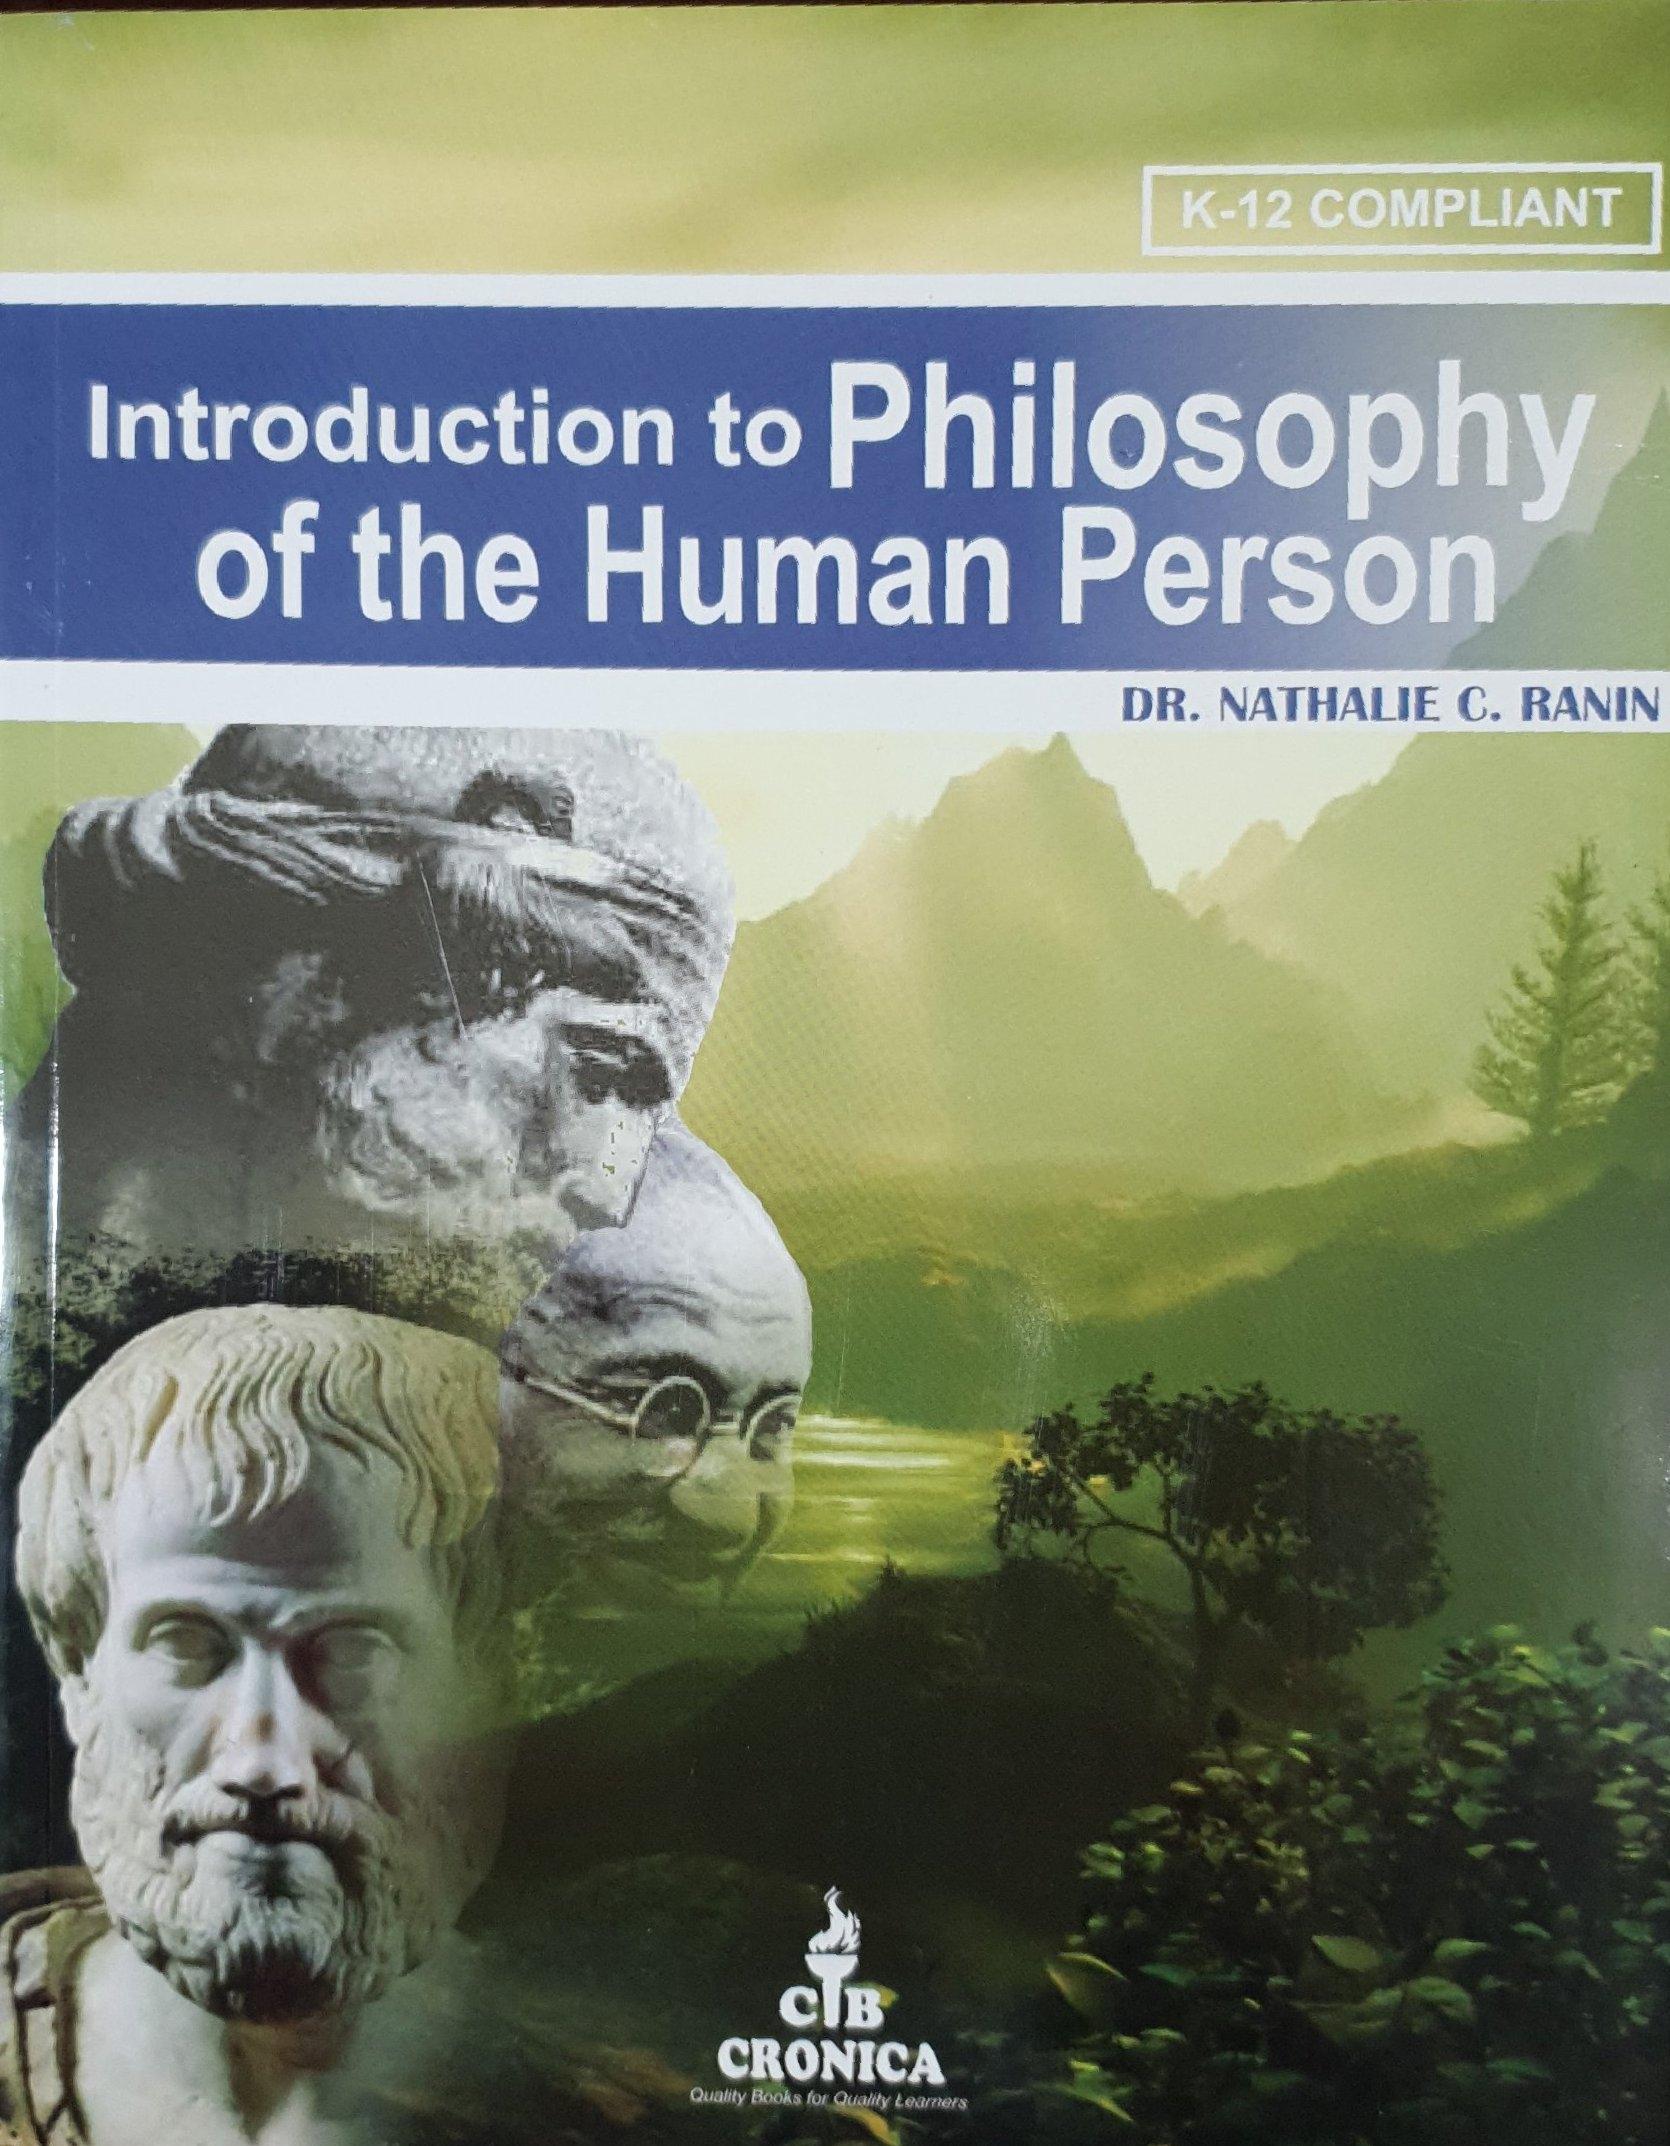 essay about introduction to the philosophy of the human person